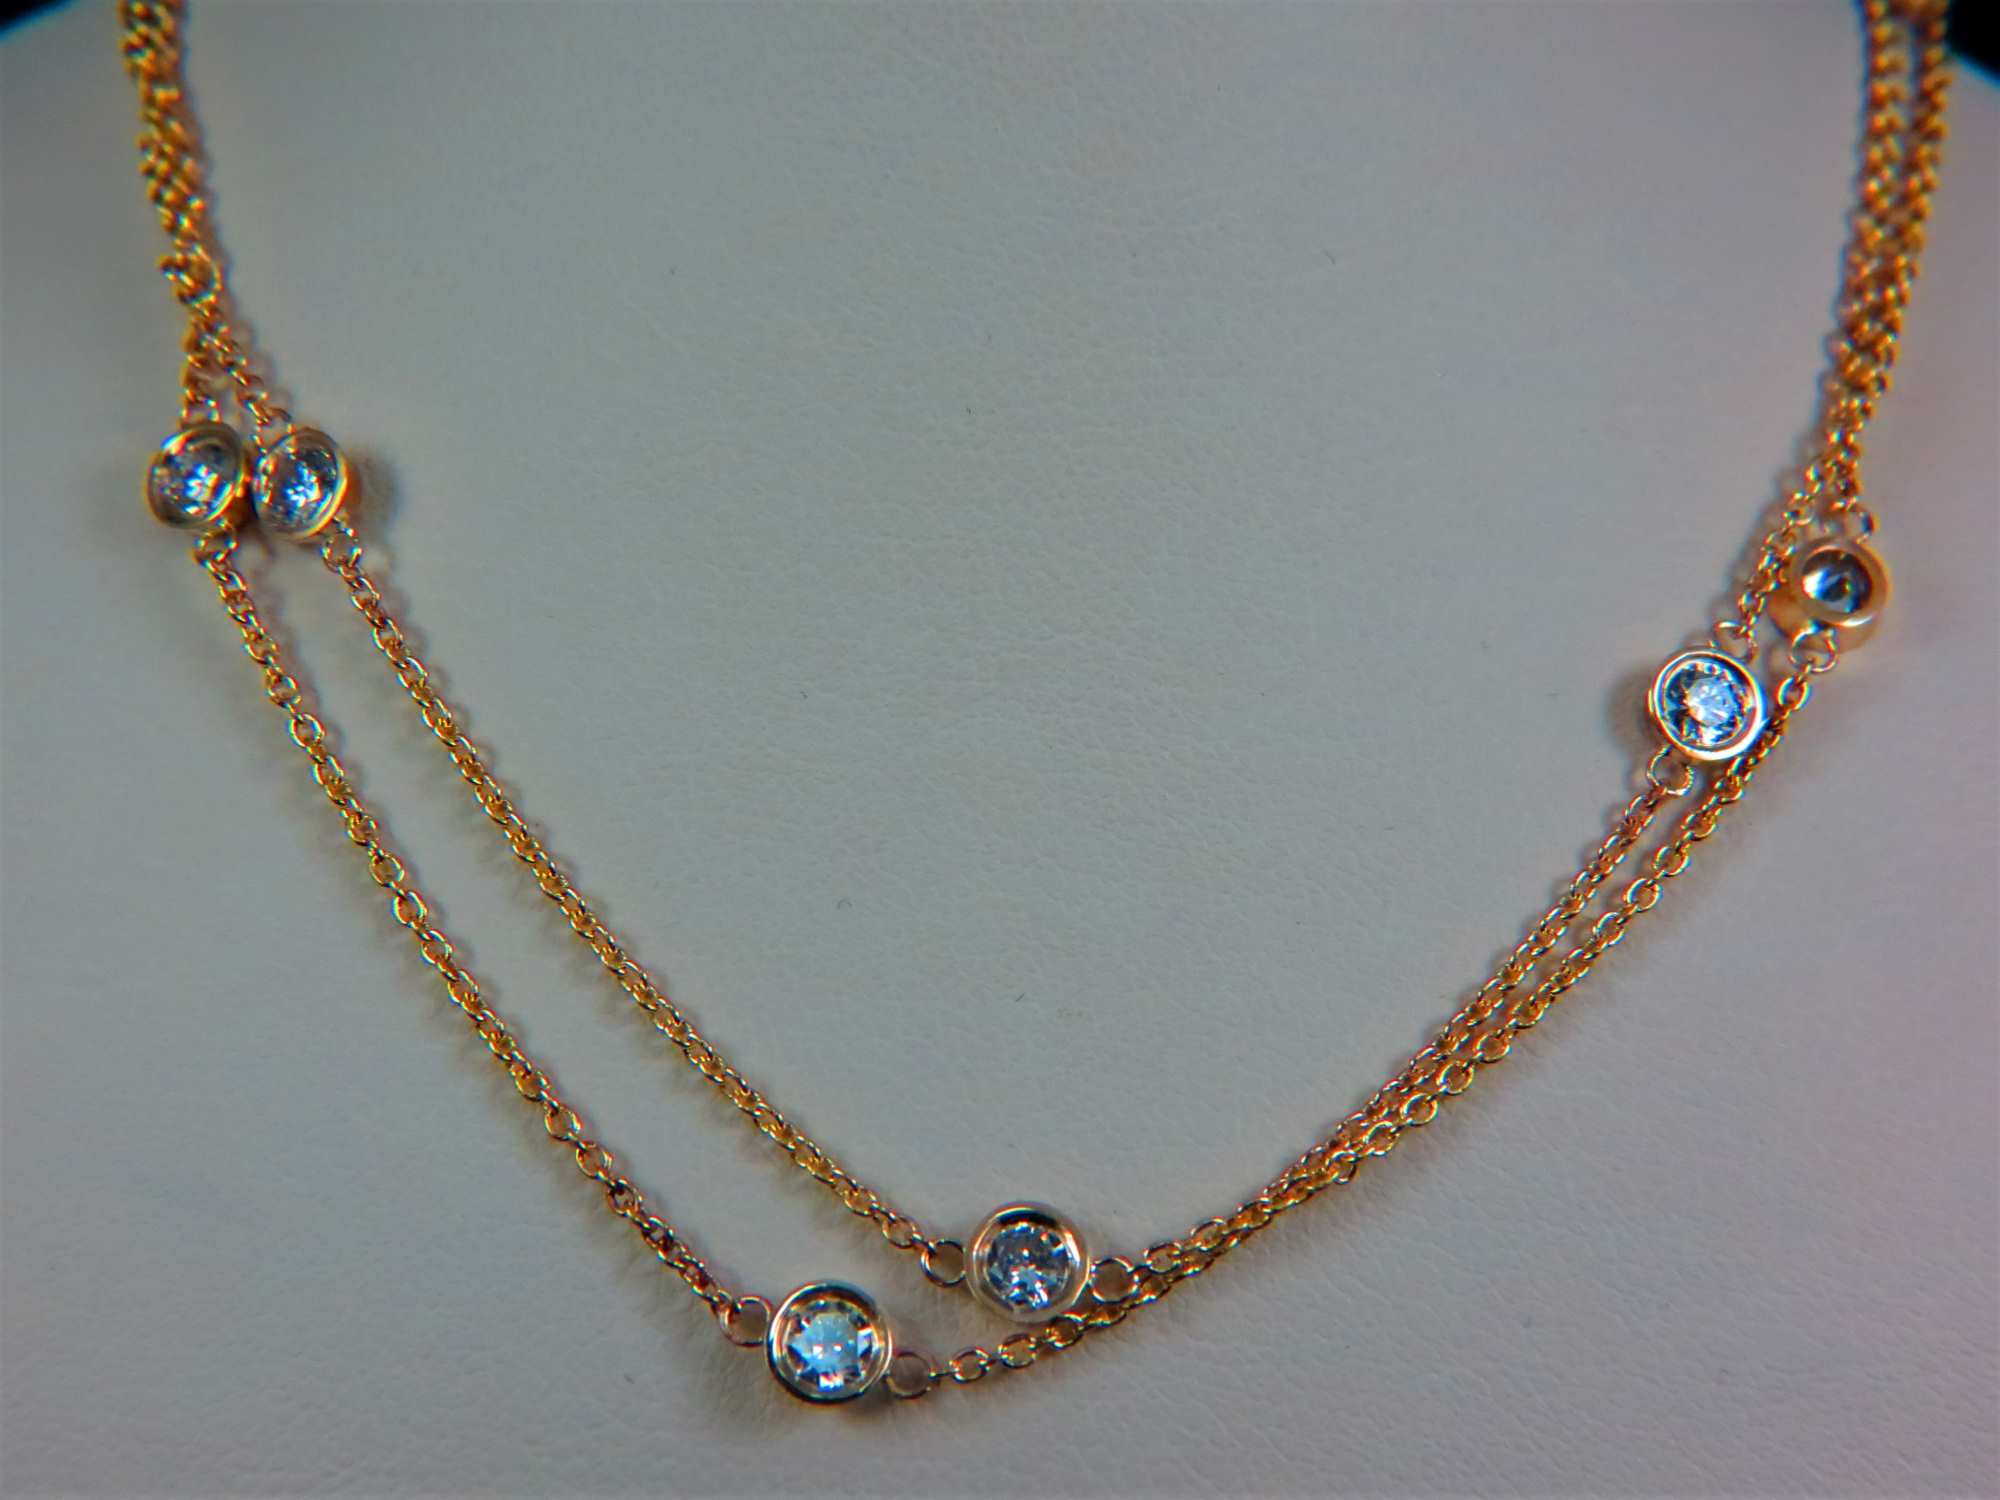 Ladies 14k Yellow Gold Diamonds by the yard necklace.